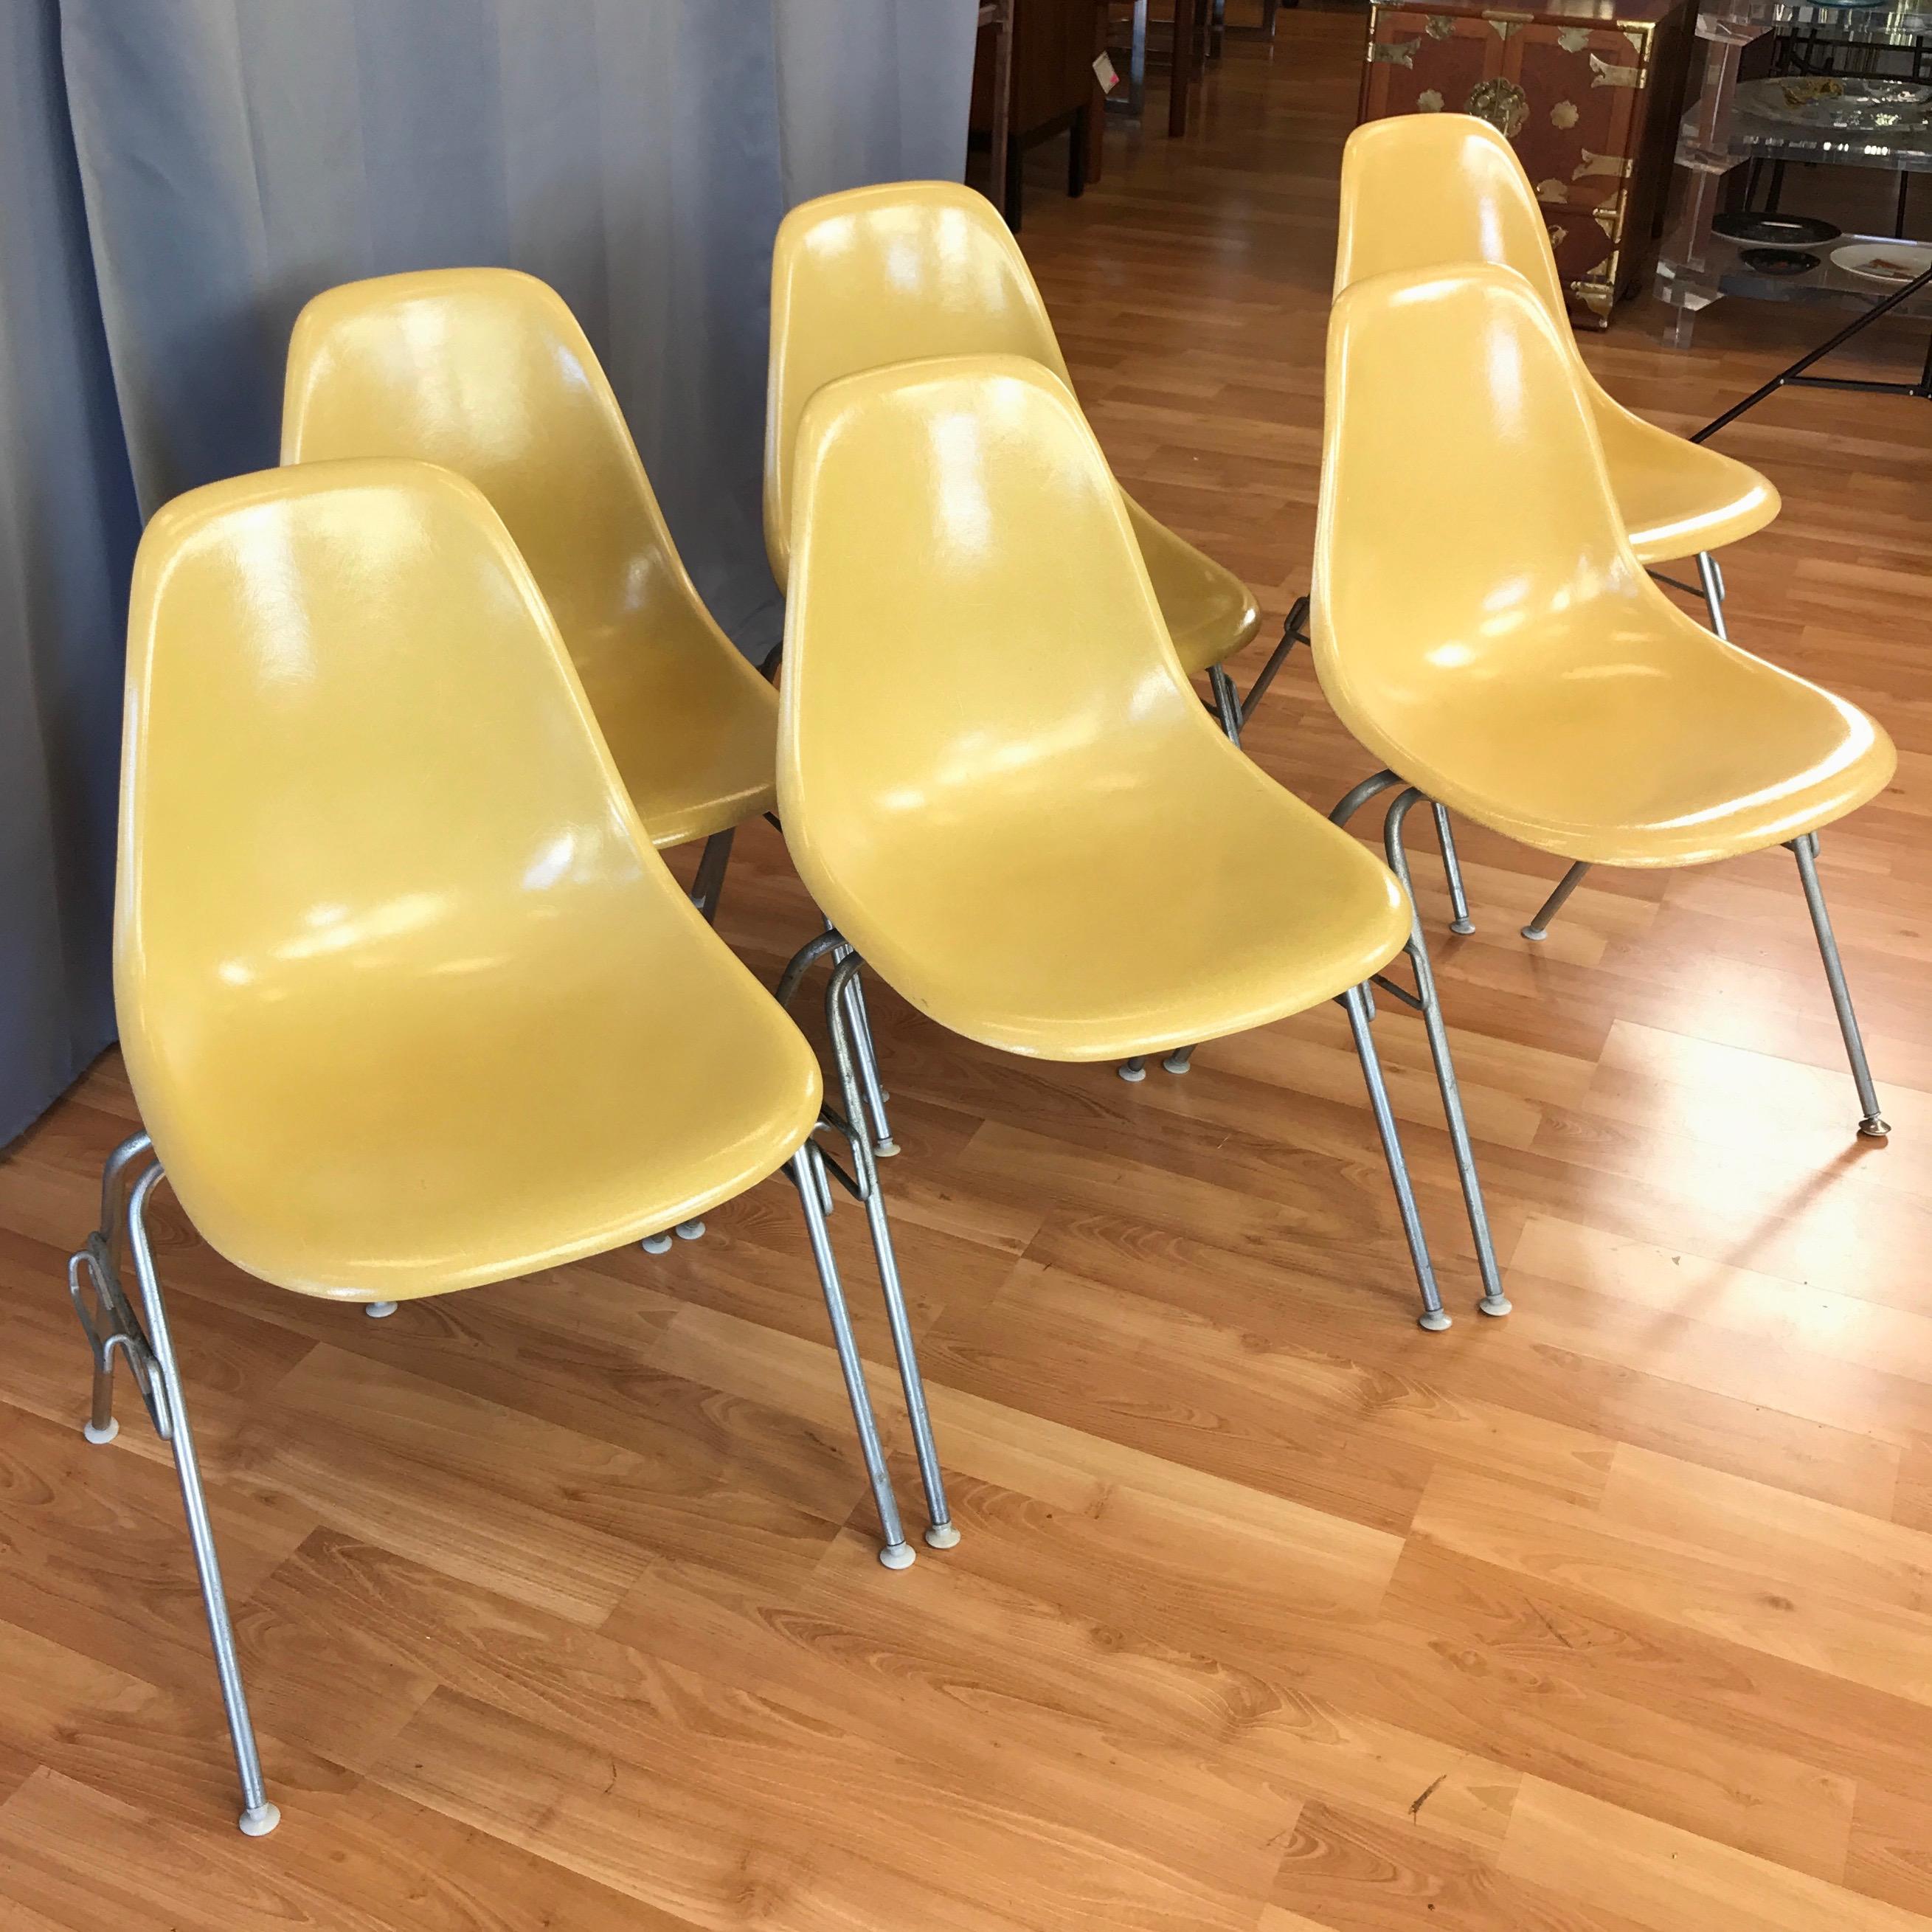 A set of six vintage DSS (“Dining Height, Side Chair, Stacking Base”) shell chairs by Charles and Ray Eames for Herman Miller.

Designed in 1948, this set dates from the 1970s. Fiberglass seat in ochre displays a warm, uniform tone with a super